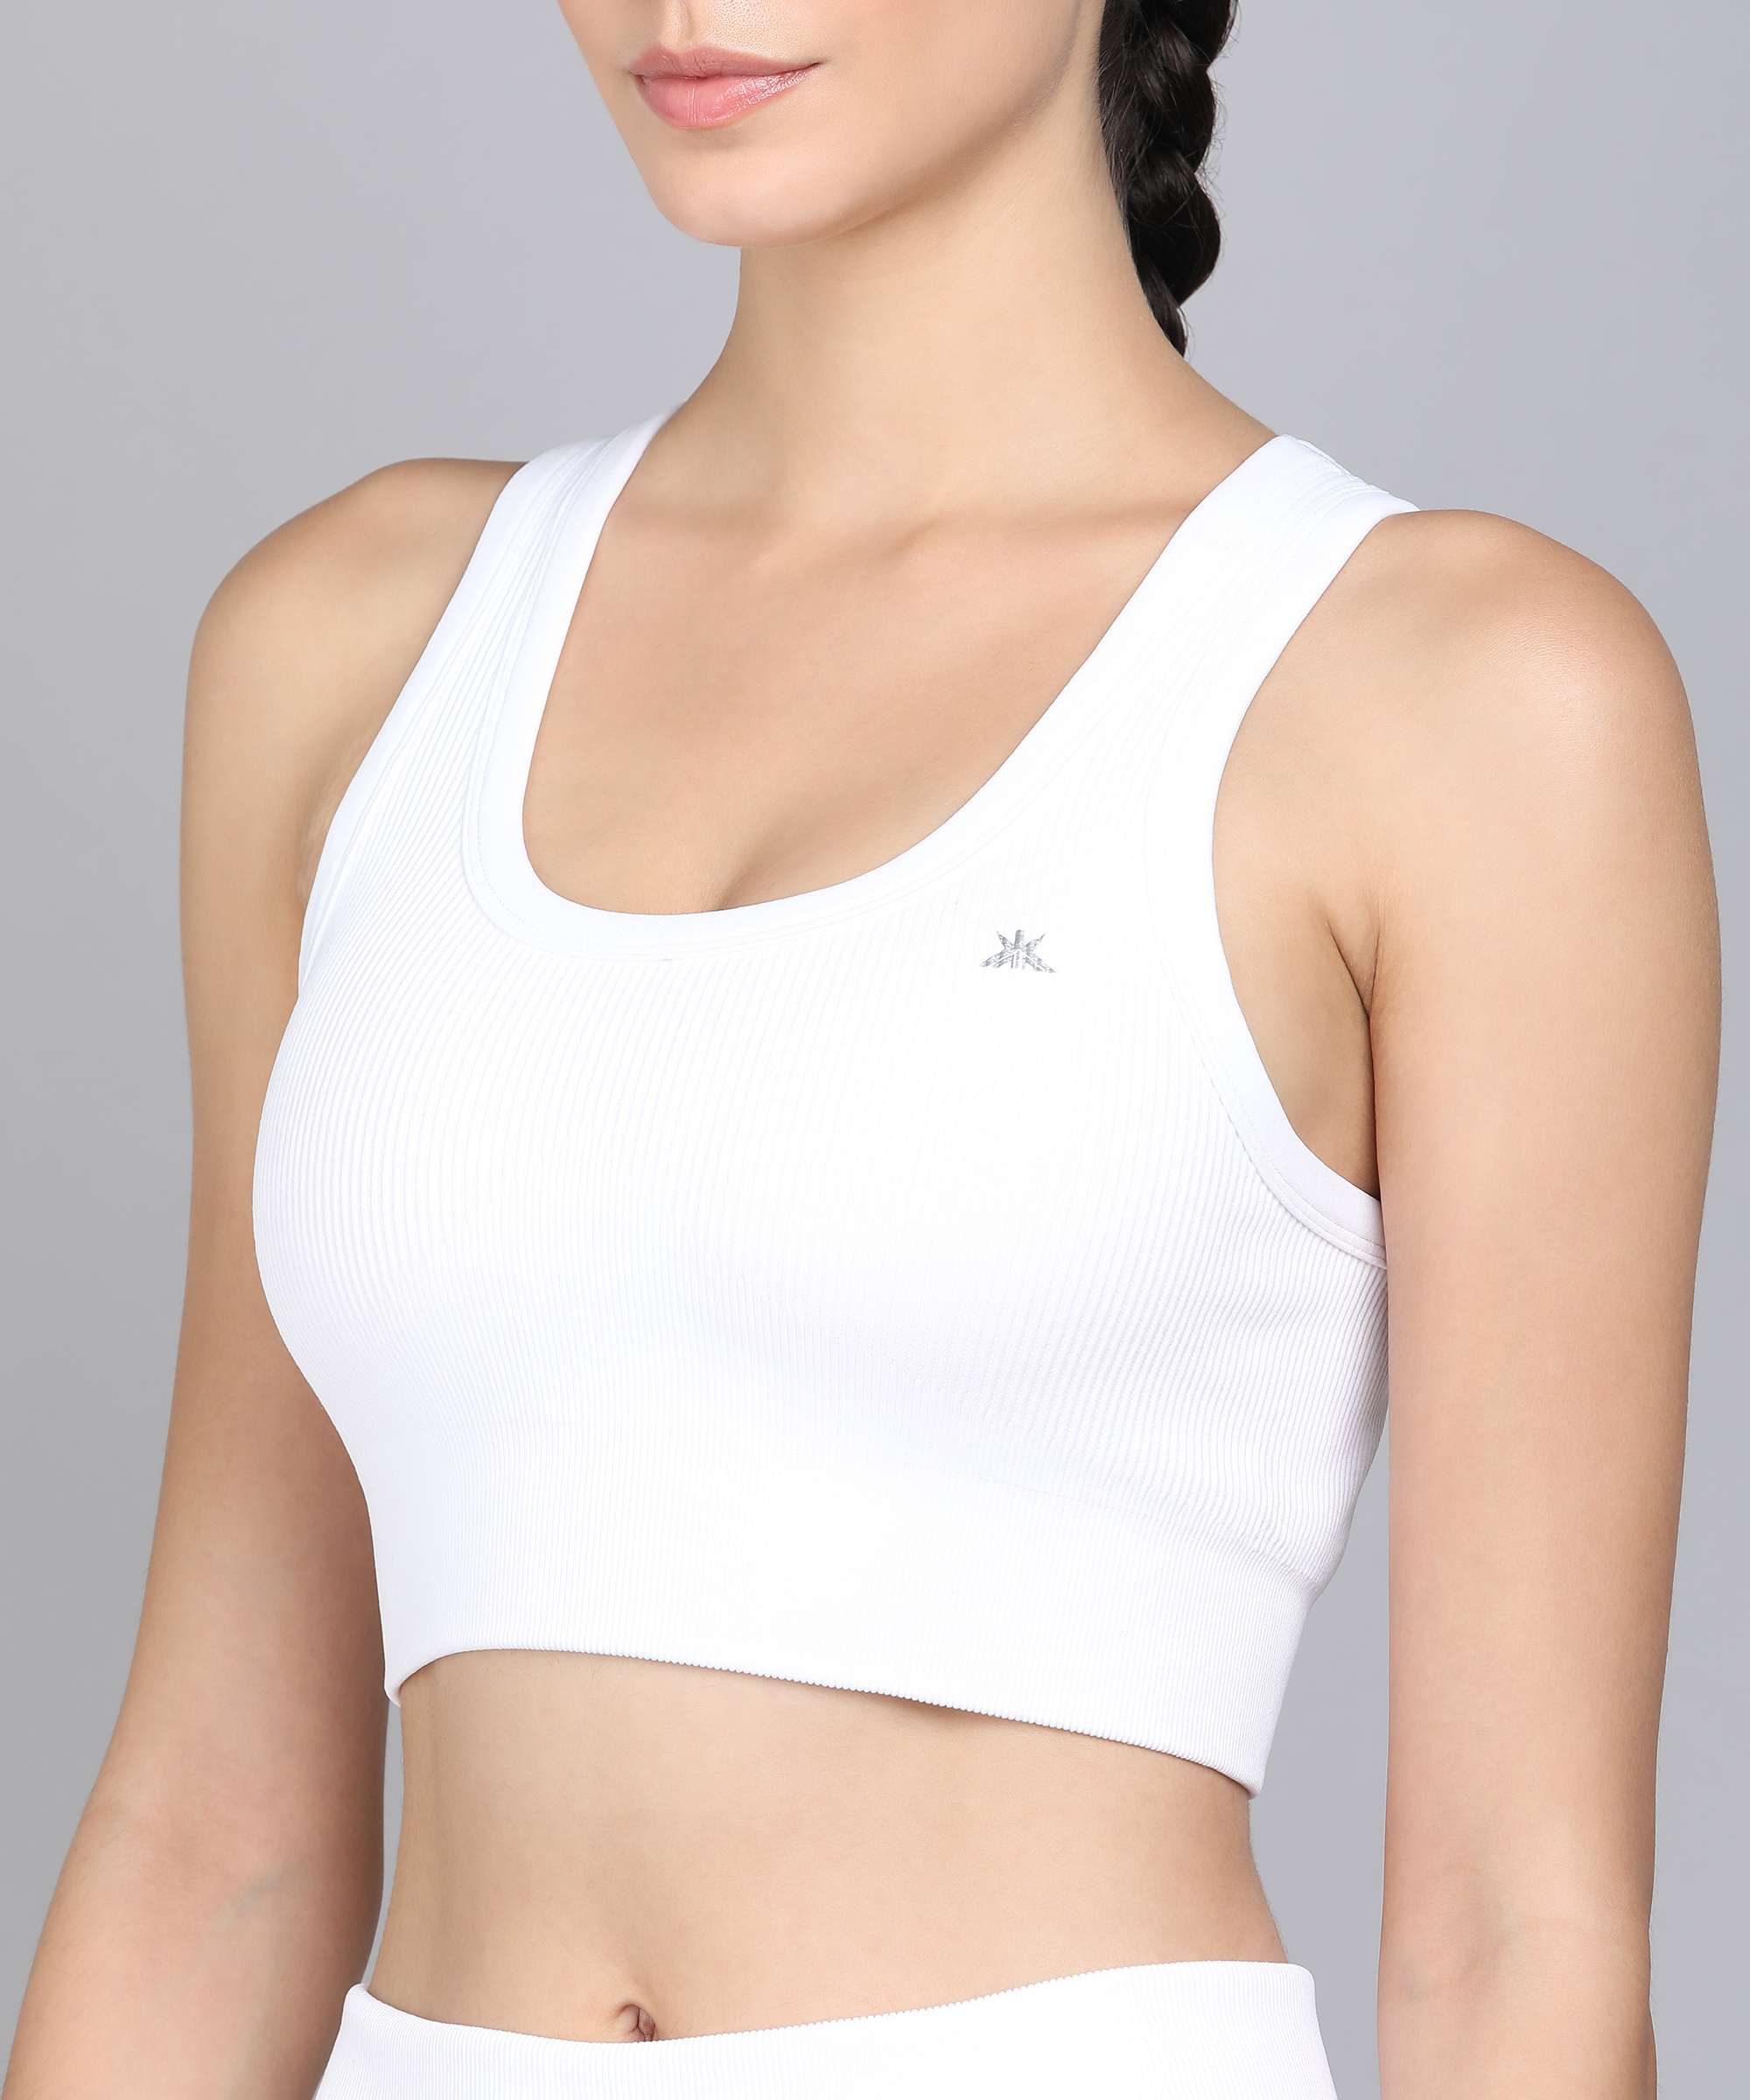 Shop for the Women's Sports Bra Collection Online